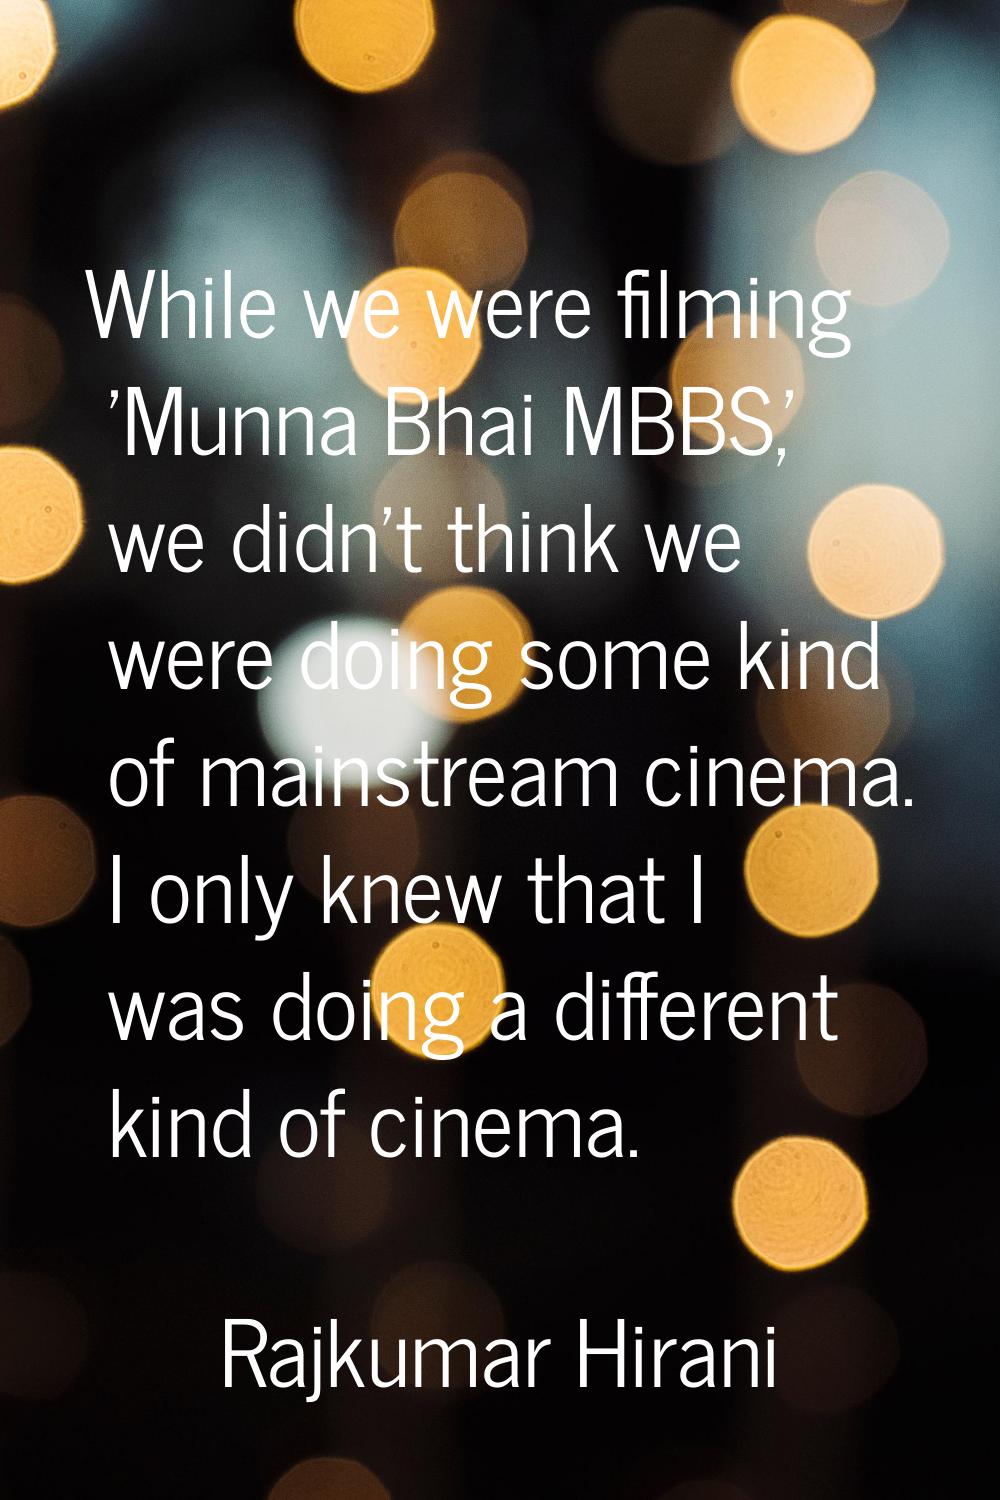 While we were filming 'Munna Bhai MBBS,' we didn't think we were doing some kind of mainstream cine